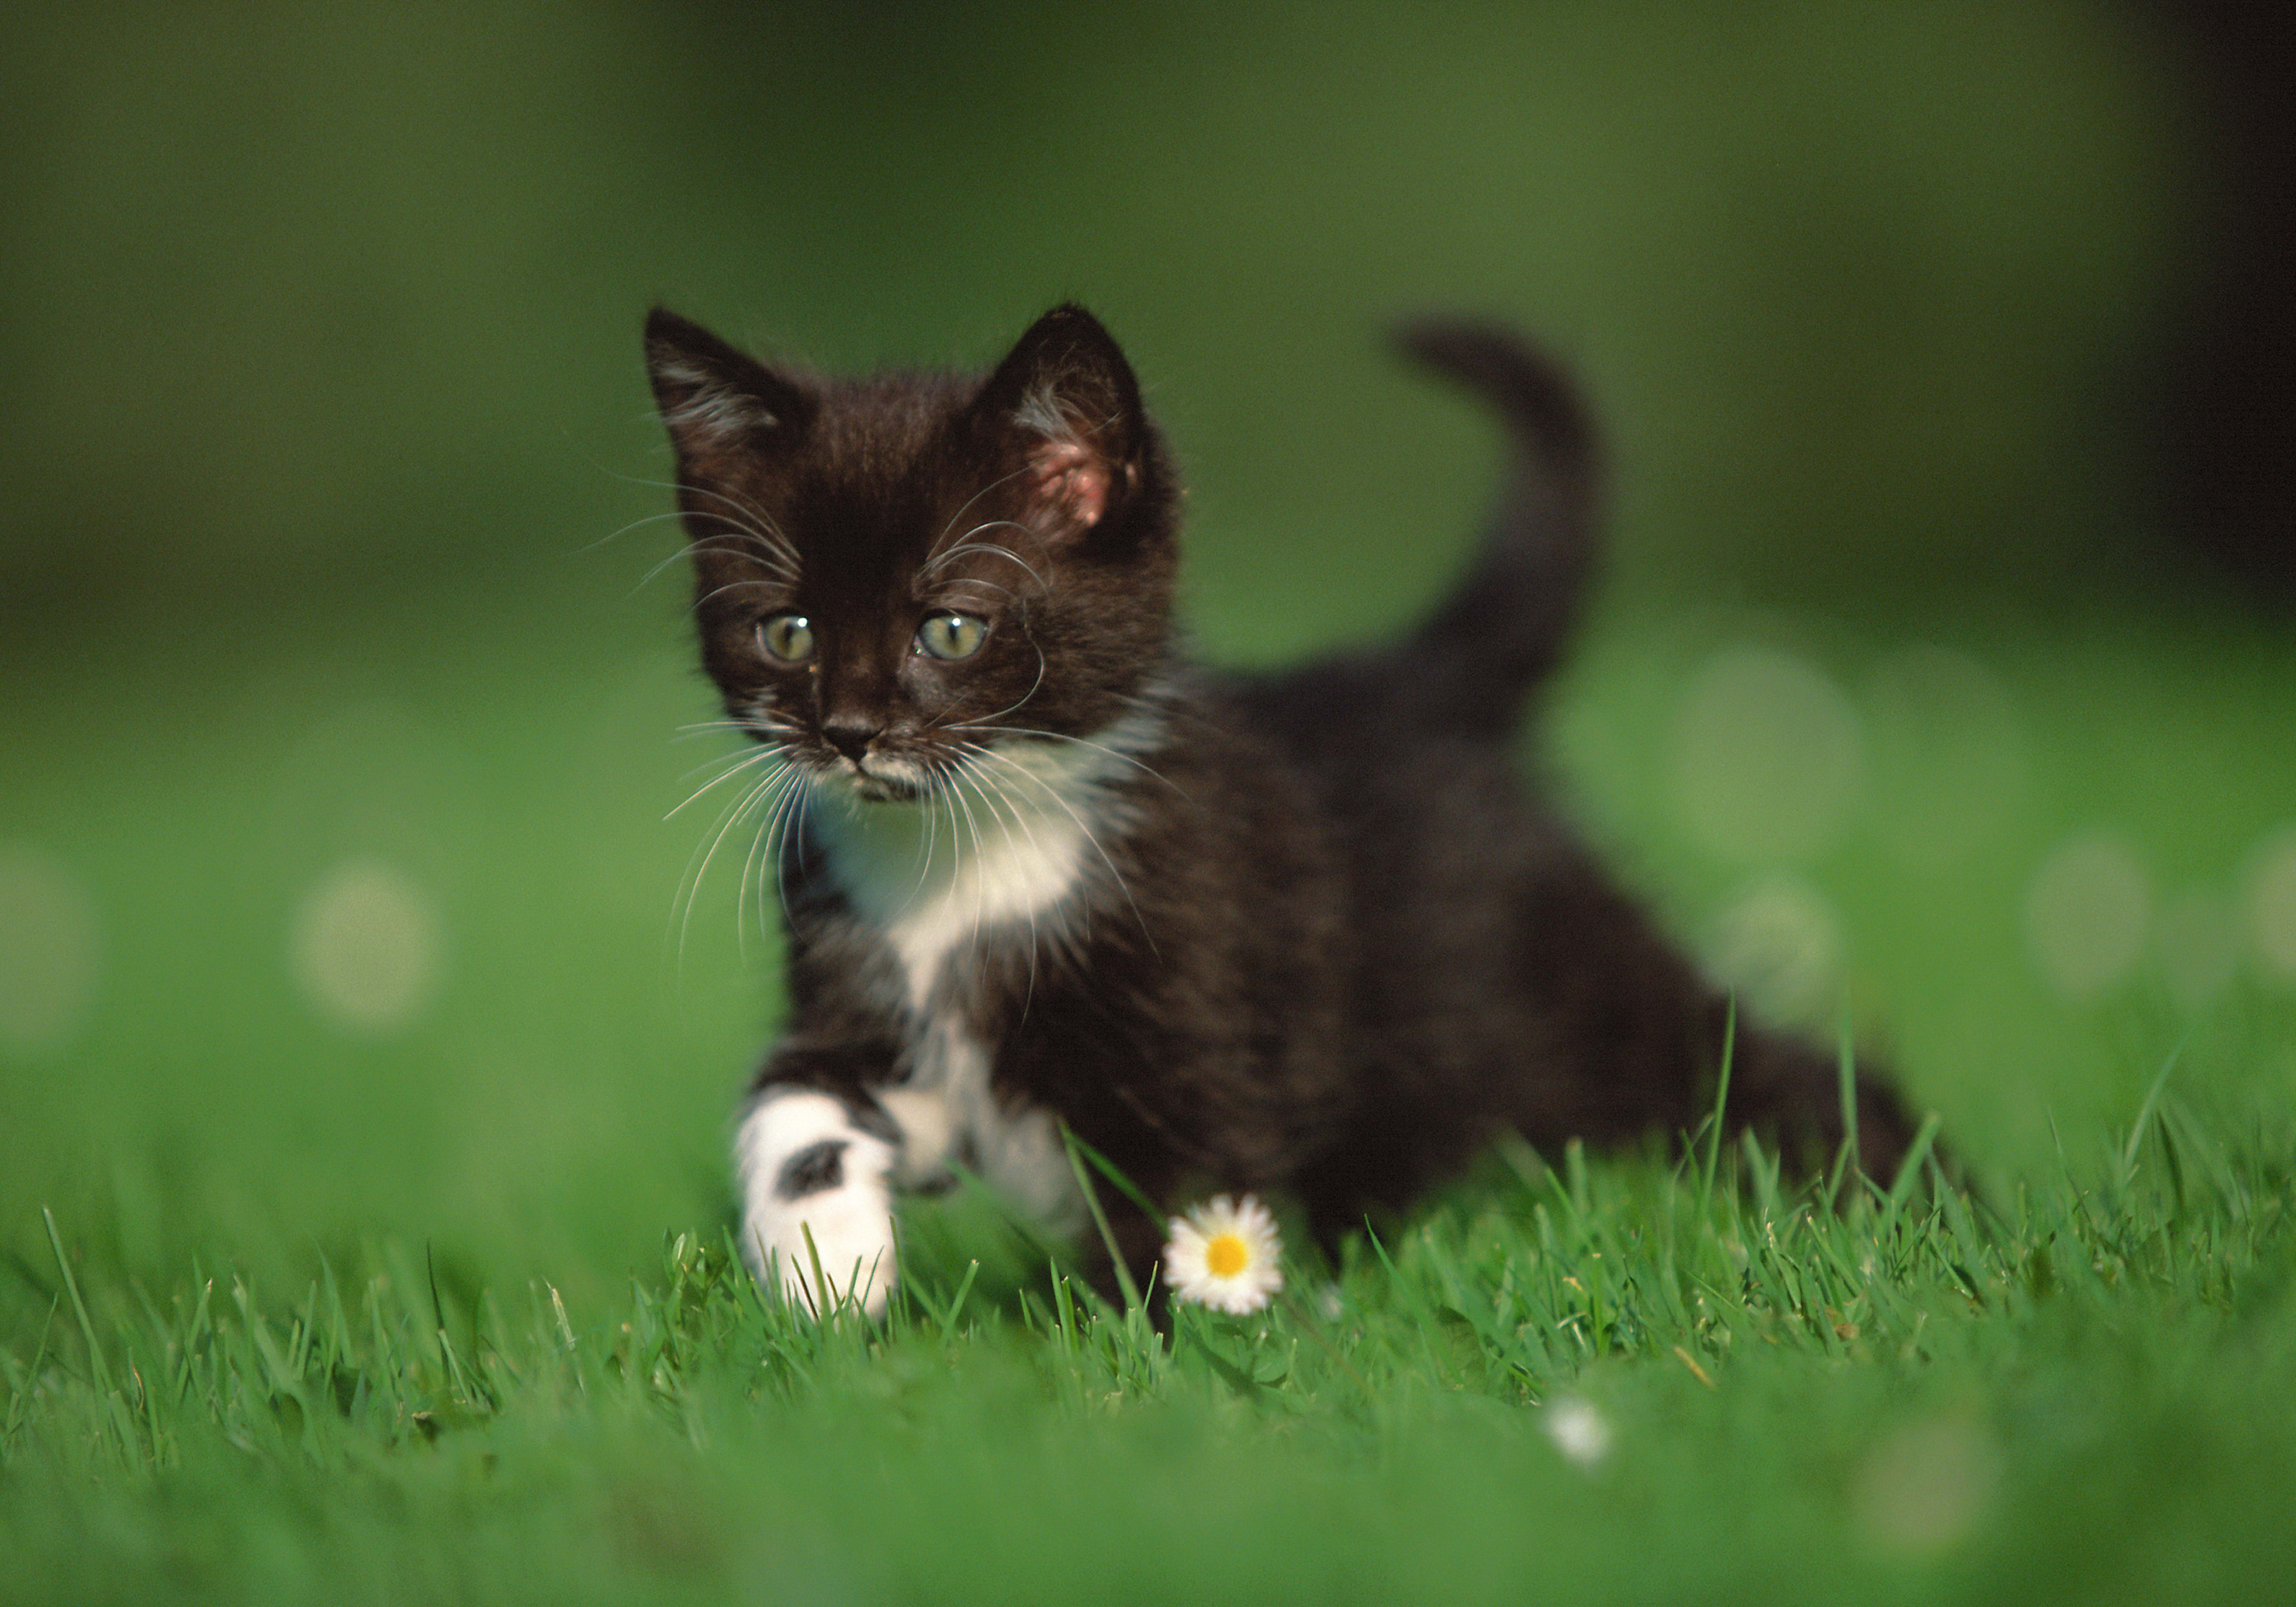 camomile, animals, grass, kitty, kitten, stroll, chamomile, paws High Definition image